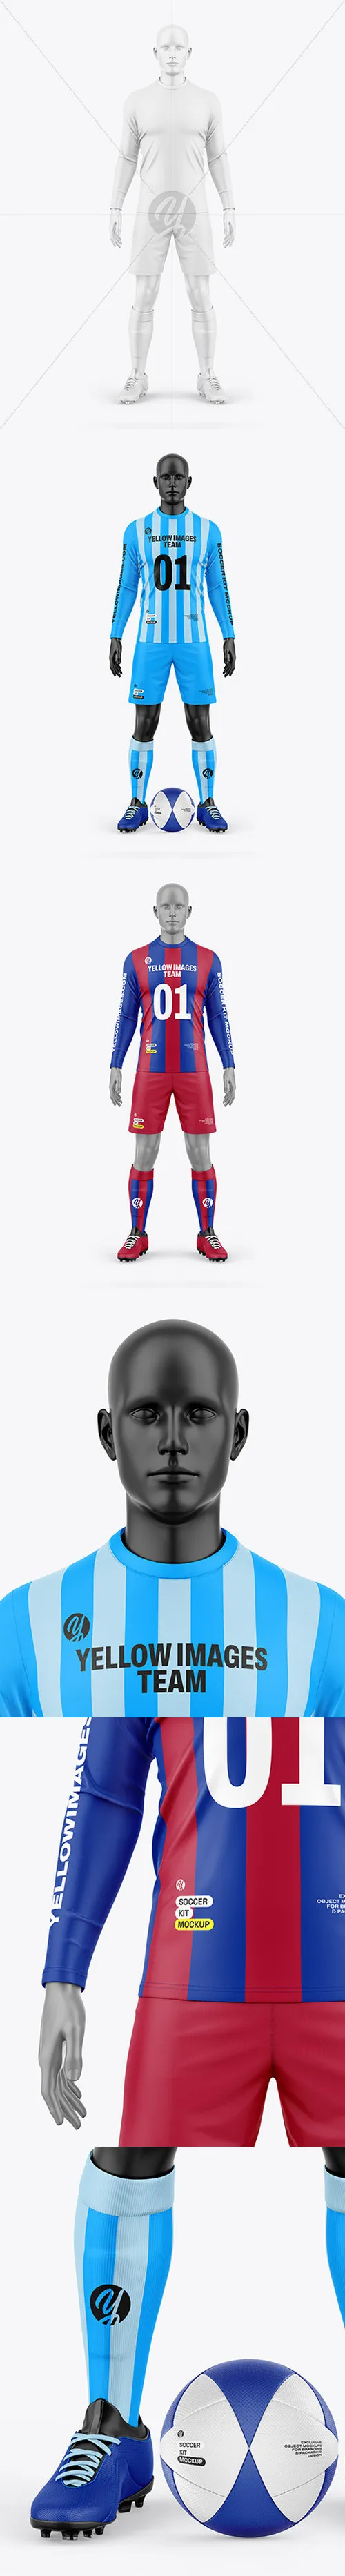 Long Sleeve Soccer Kit w/ Mannequin Mockup - Front View 133552